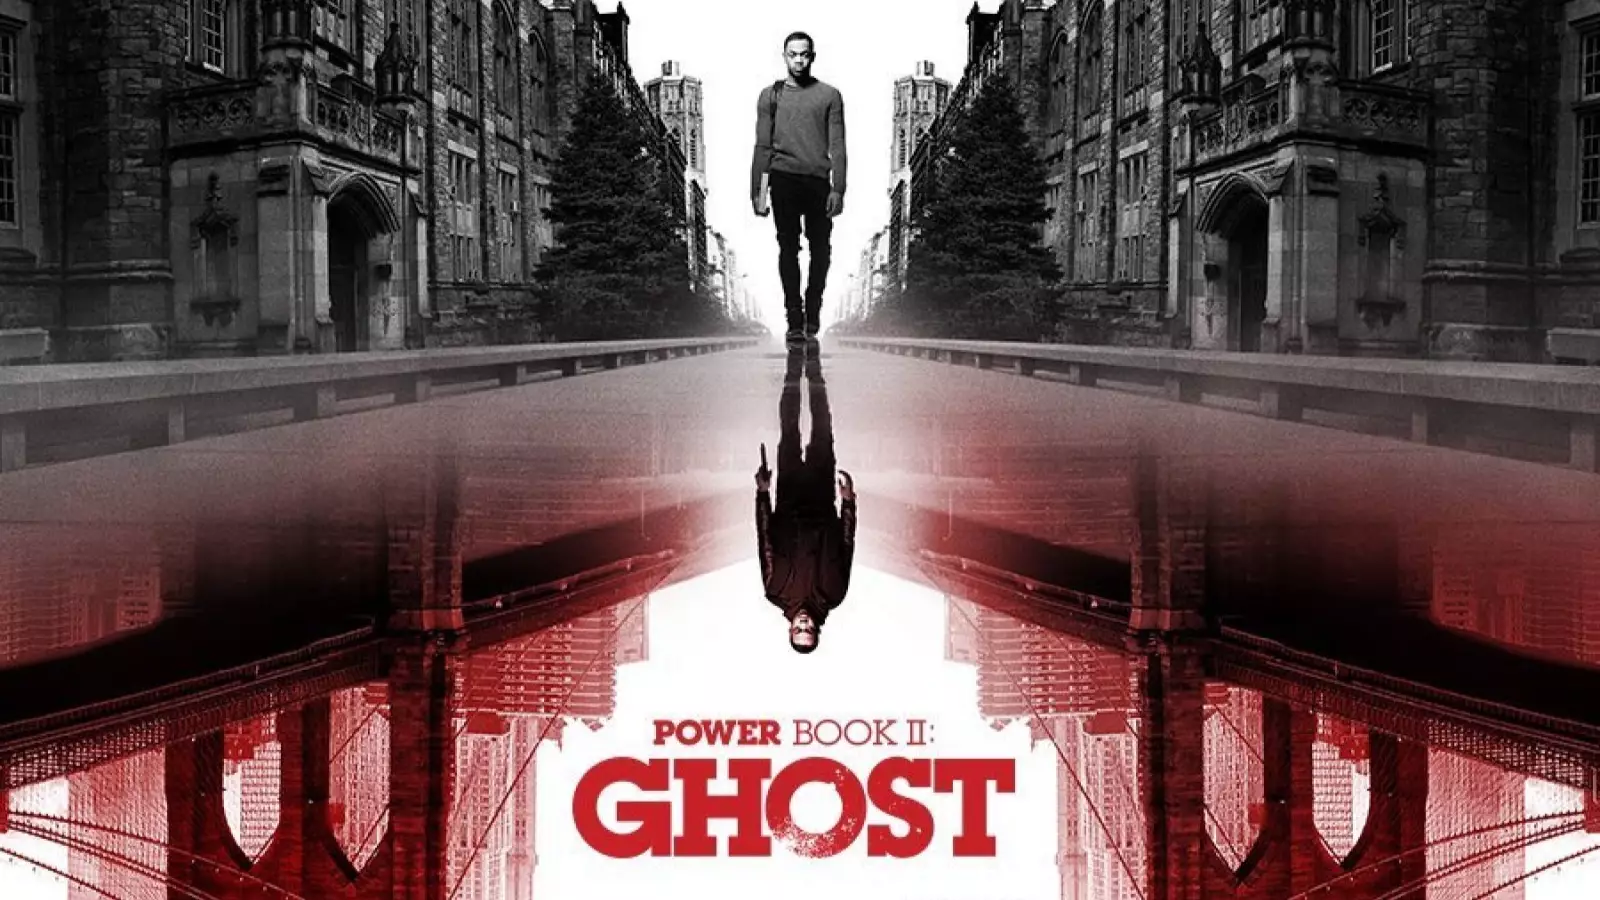 50 Cent Drops Trailer For Power Book II: Ghost